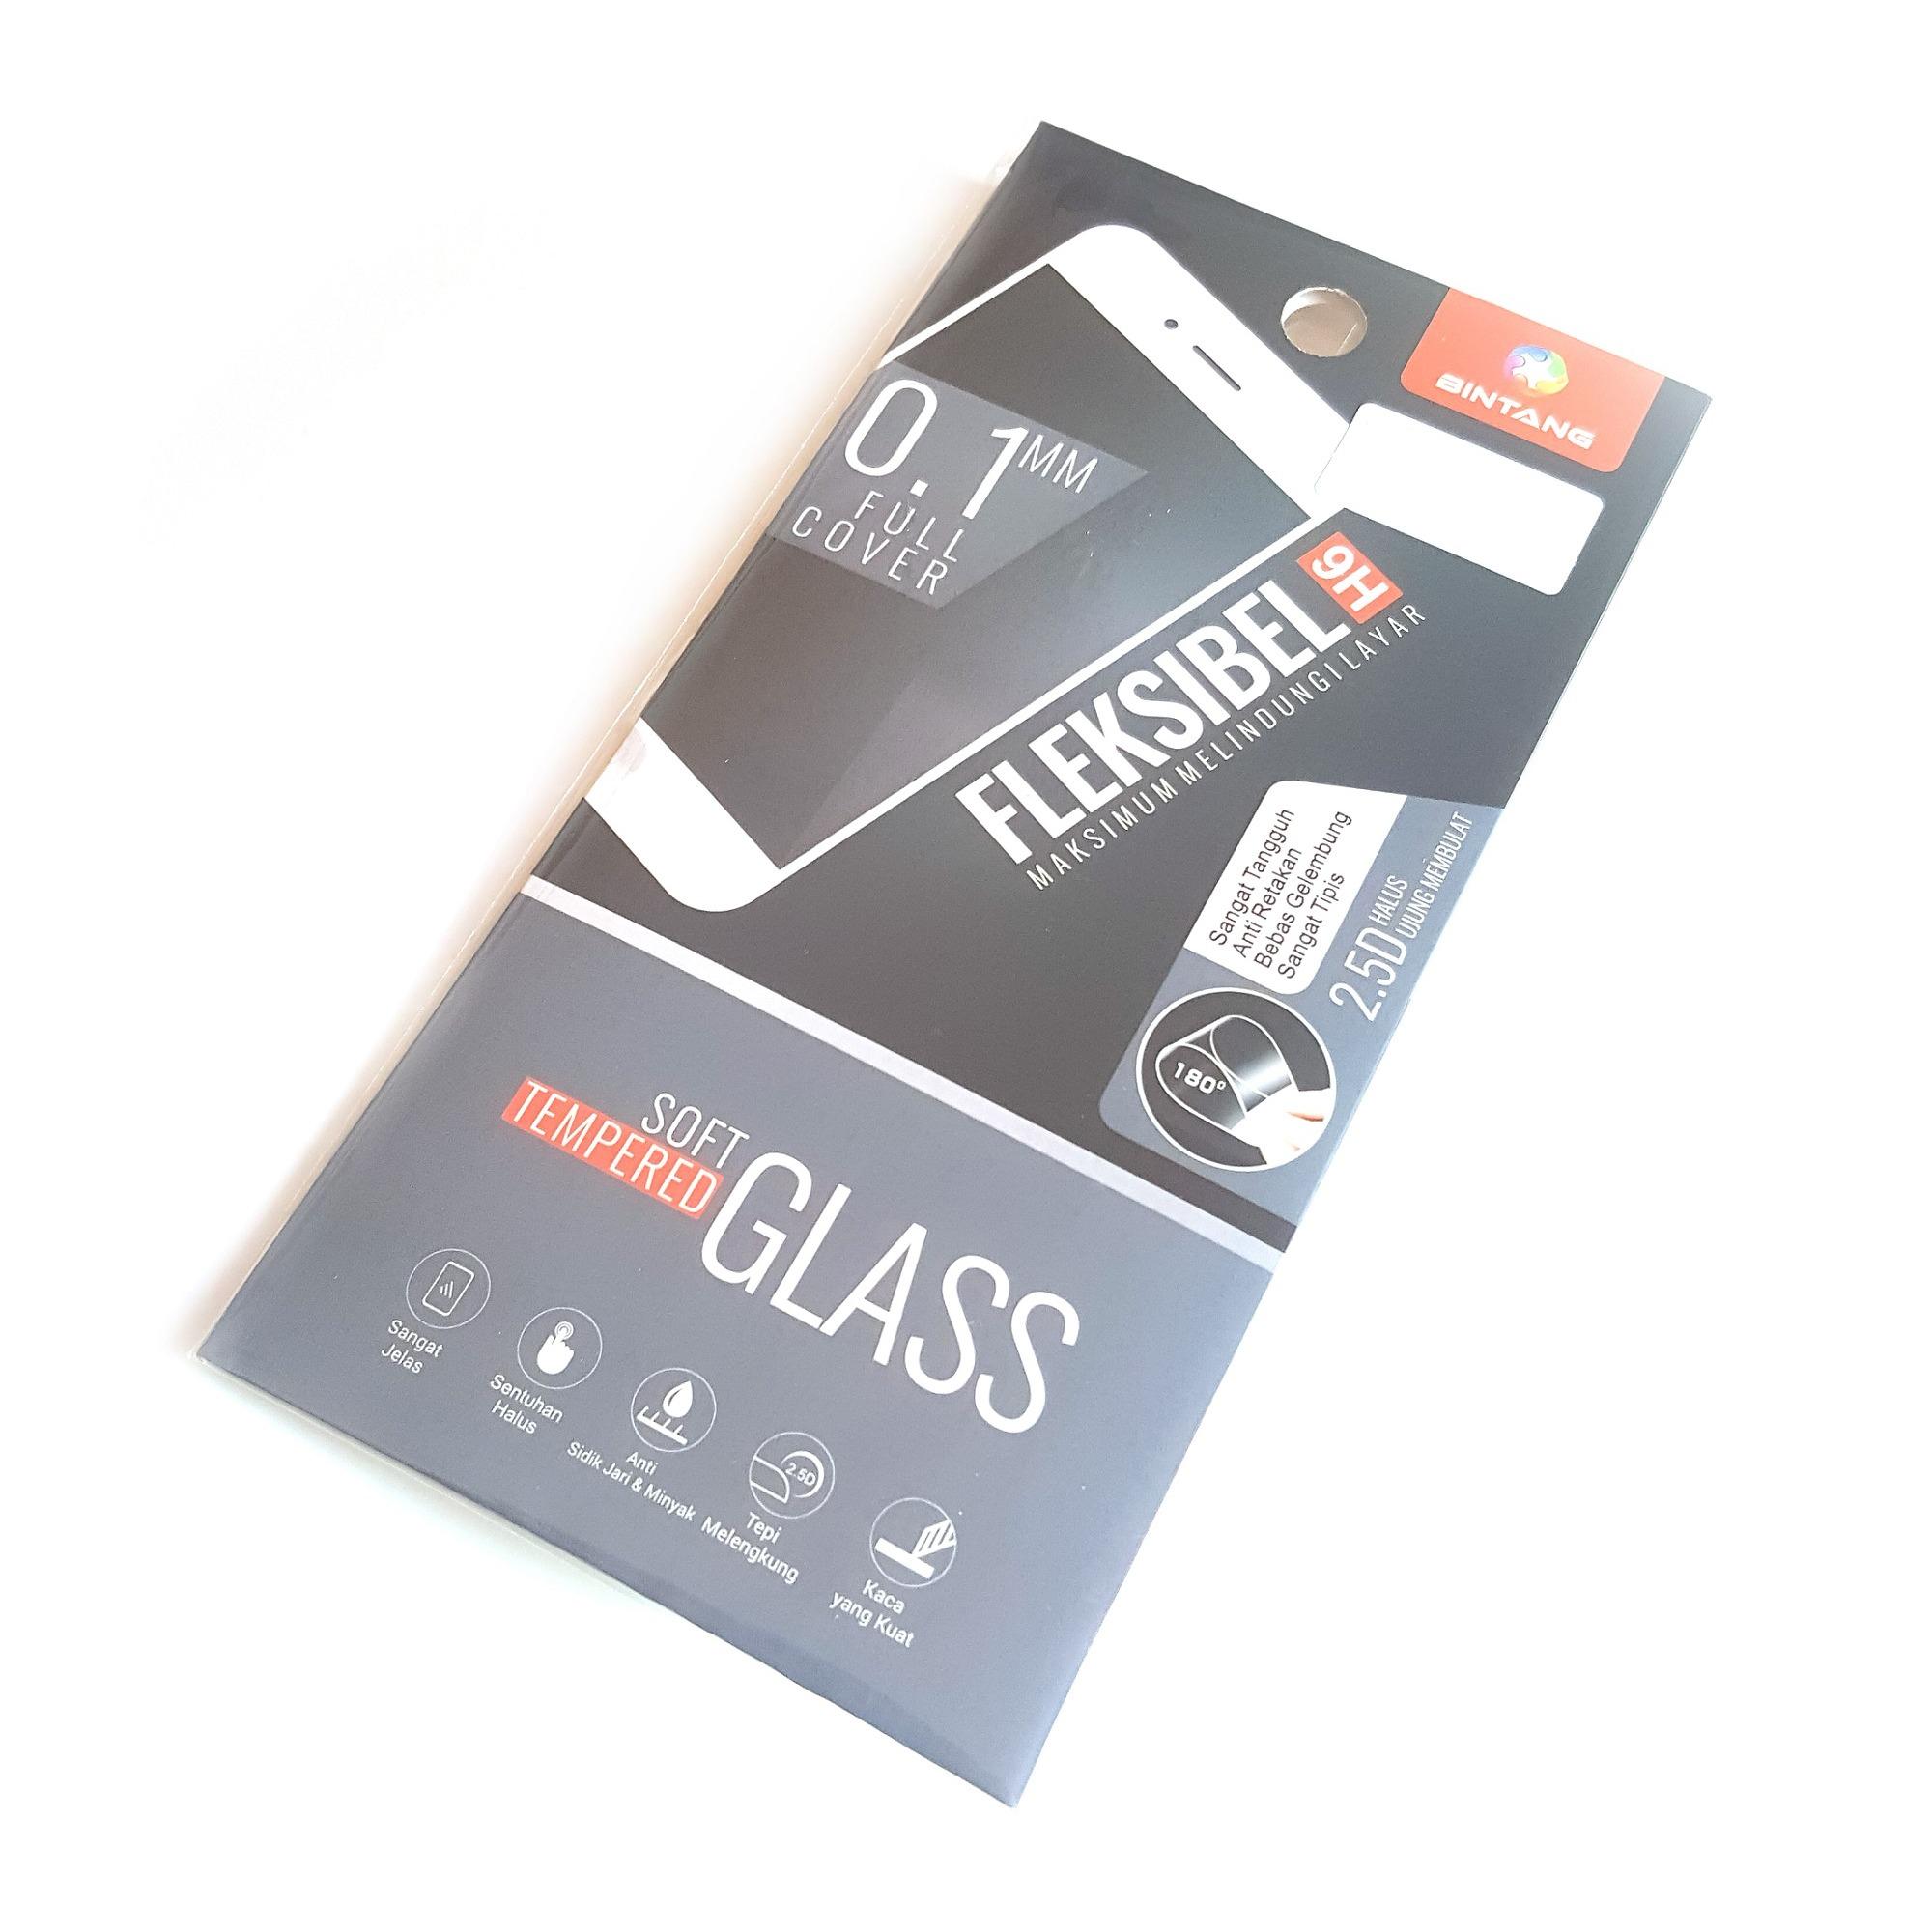 Tempered Glass Protector Iphone 6 / iphone 6s 4.7 Inch Flexible 0.1 mm Apple Anti Gores Kaca - Putih